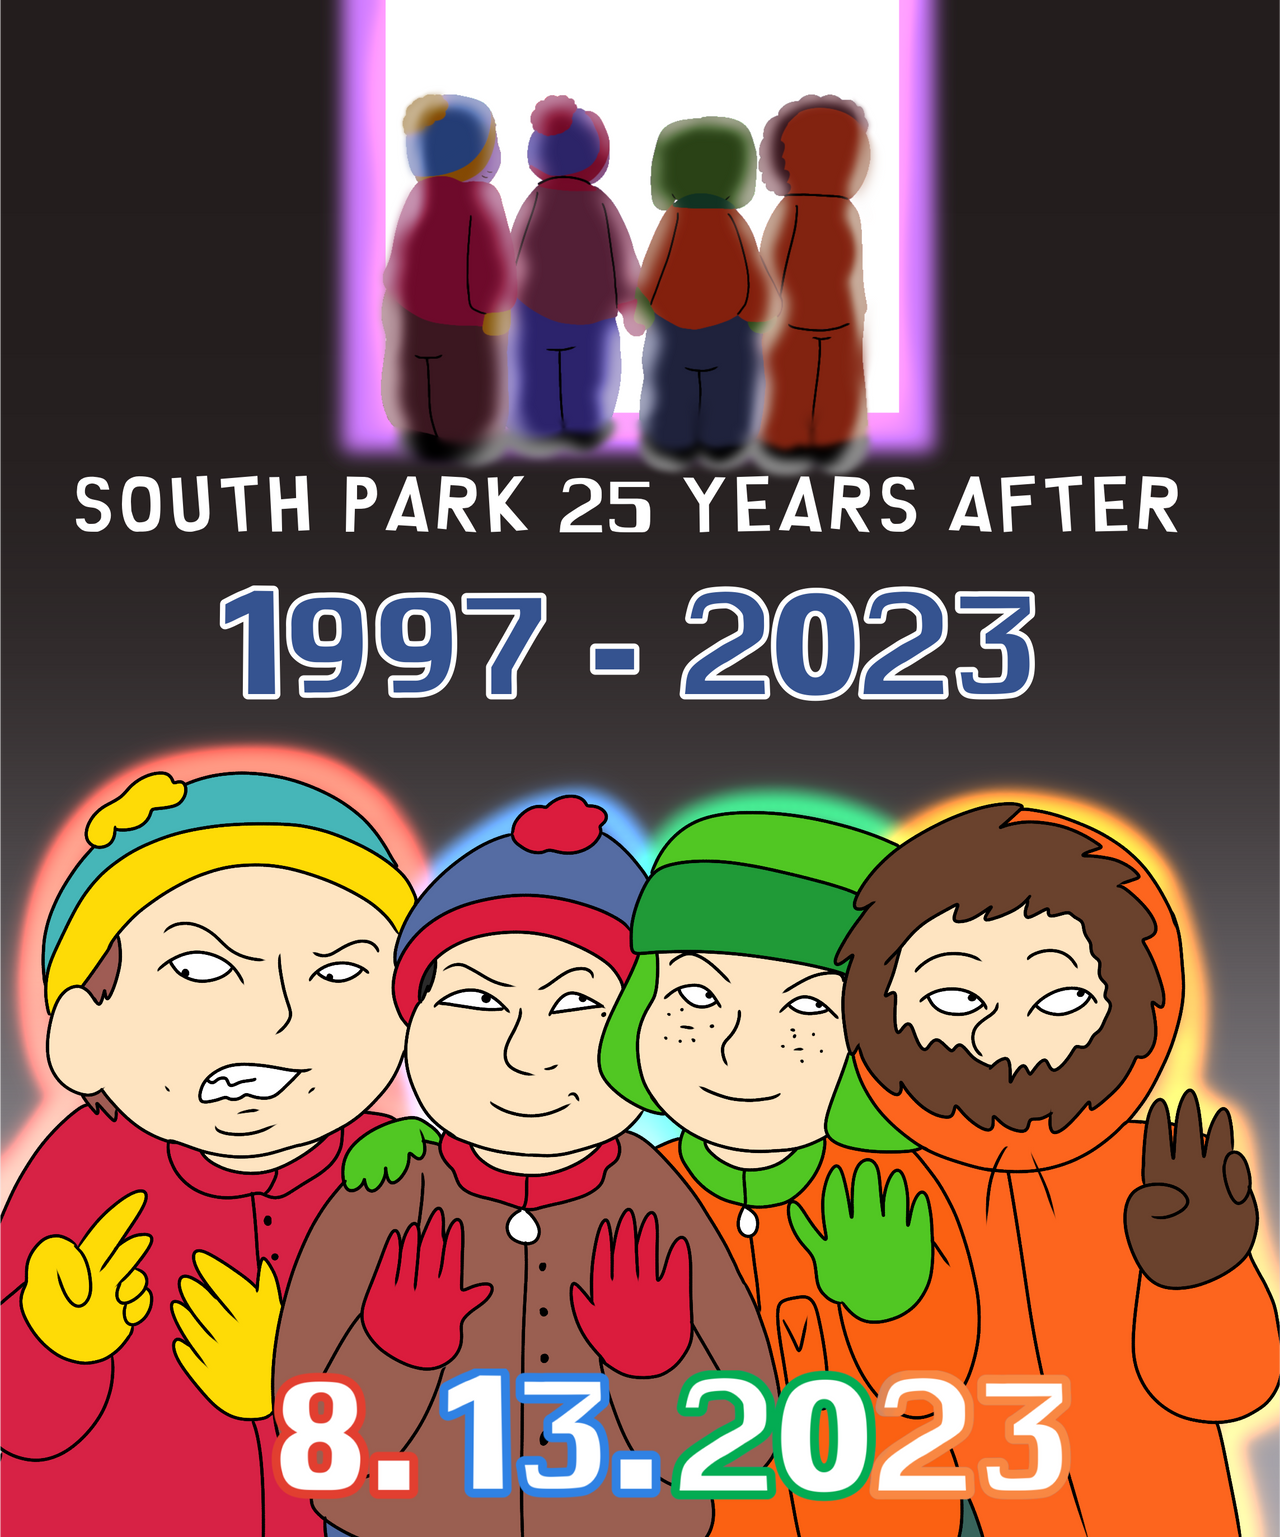 South Park - 26th Anniversary (25 Years After) by YamaChannel1987